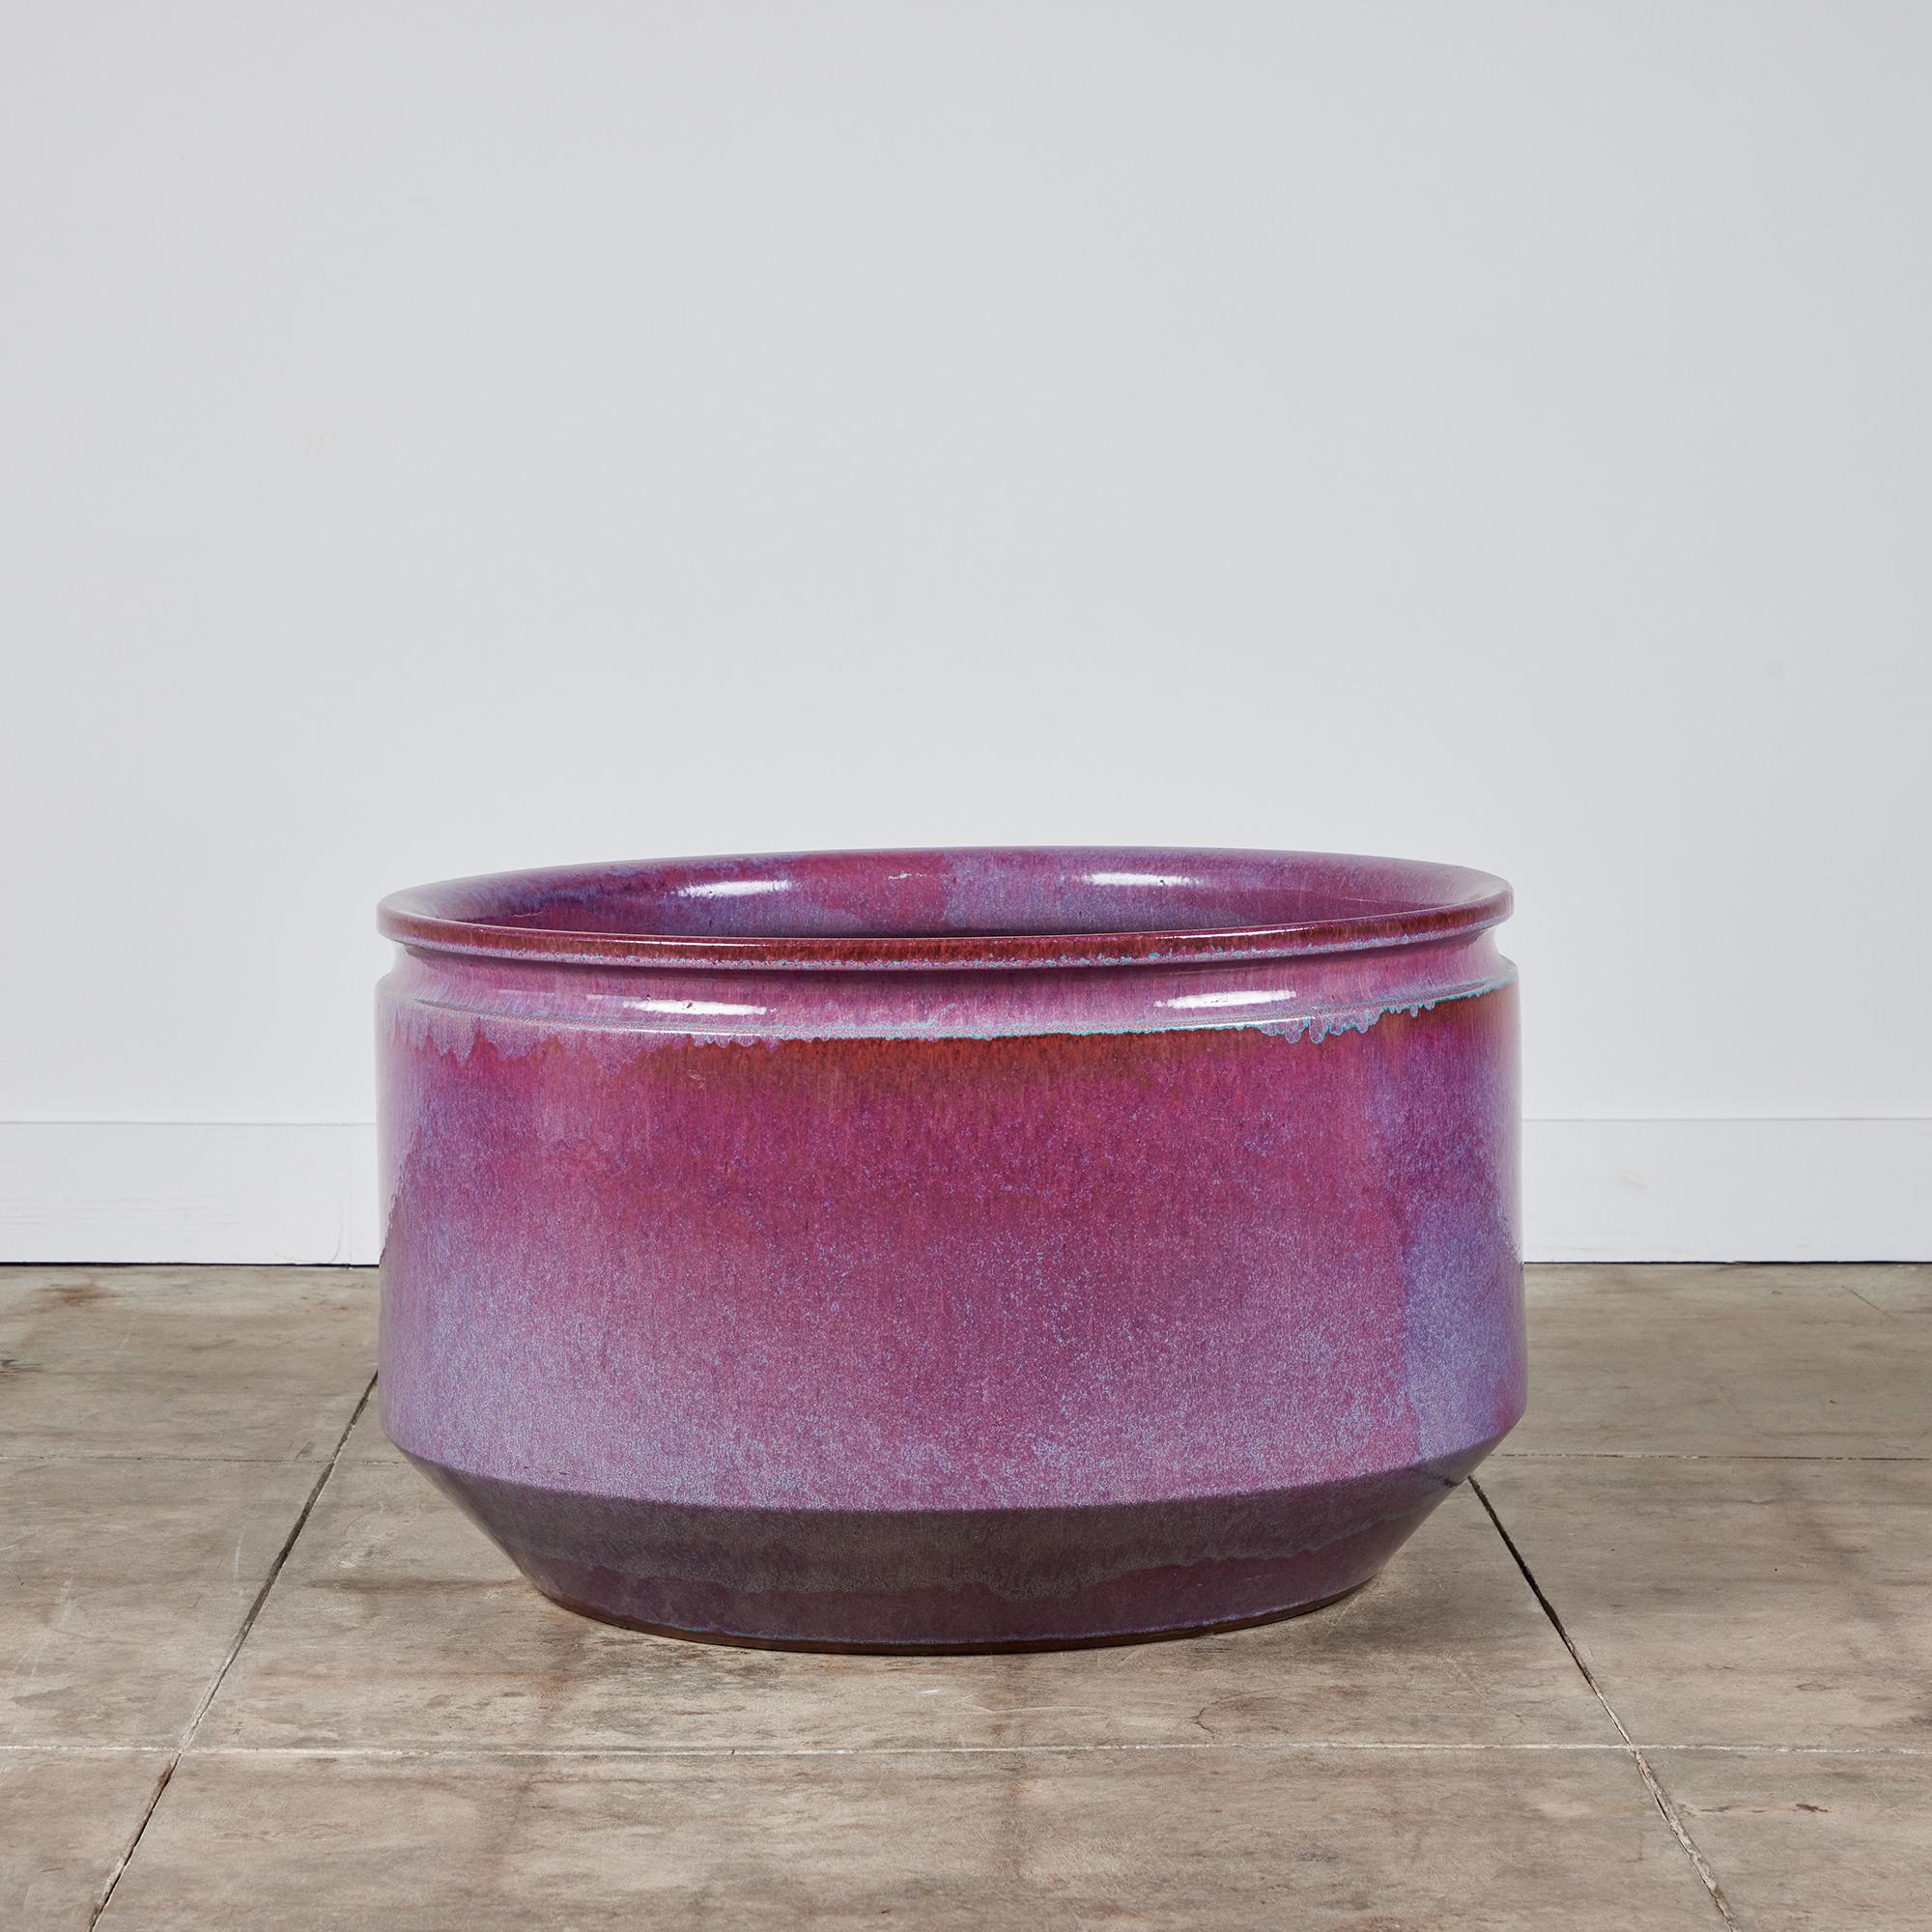 A large ceramic bowl planter from David Cressey and Robert Maxwell for Earthgender. The planter has an ombre glazed interior and exterior ranging in colors of purple, pink and blue with slightly bowed sides and a flattened lip. 

Dimensions
32.5